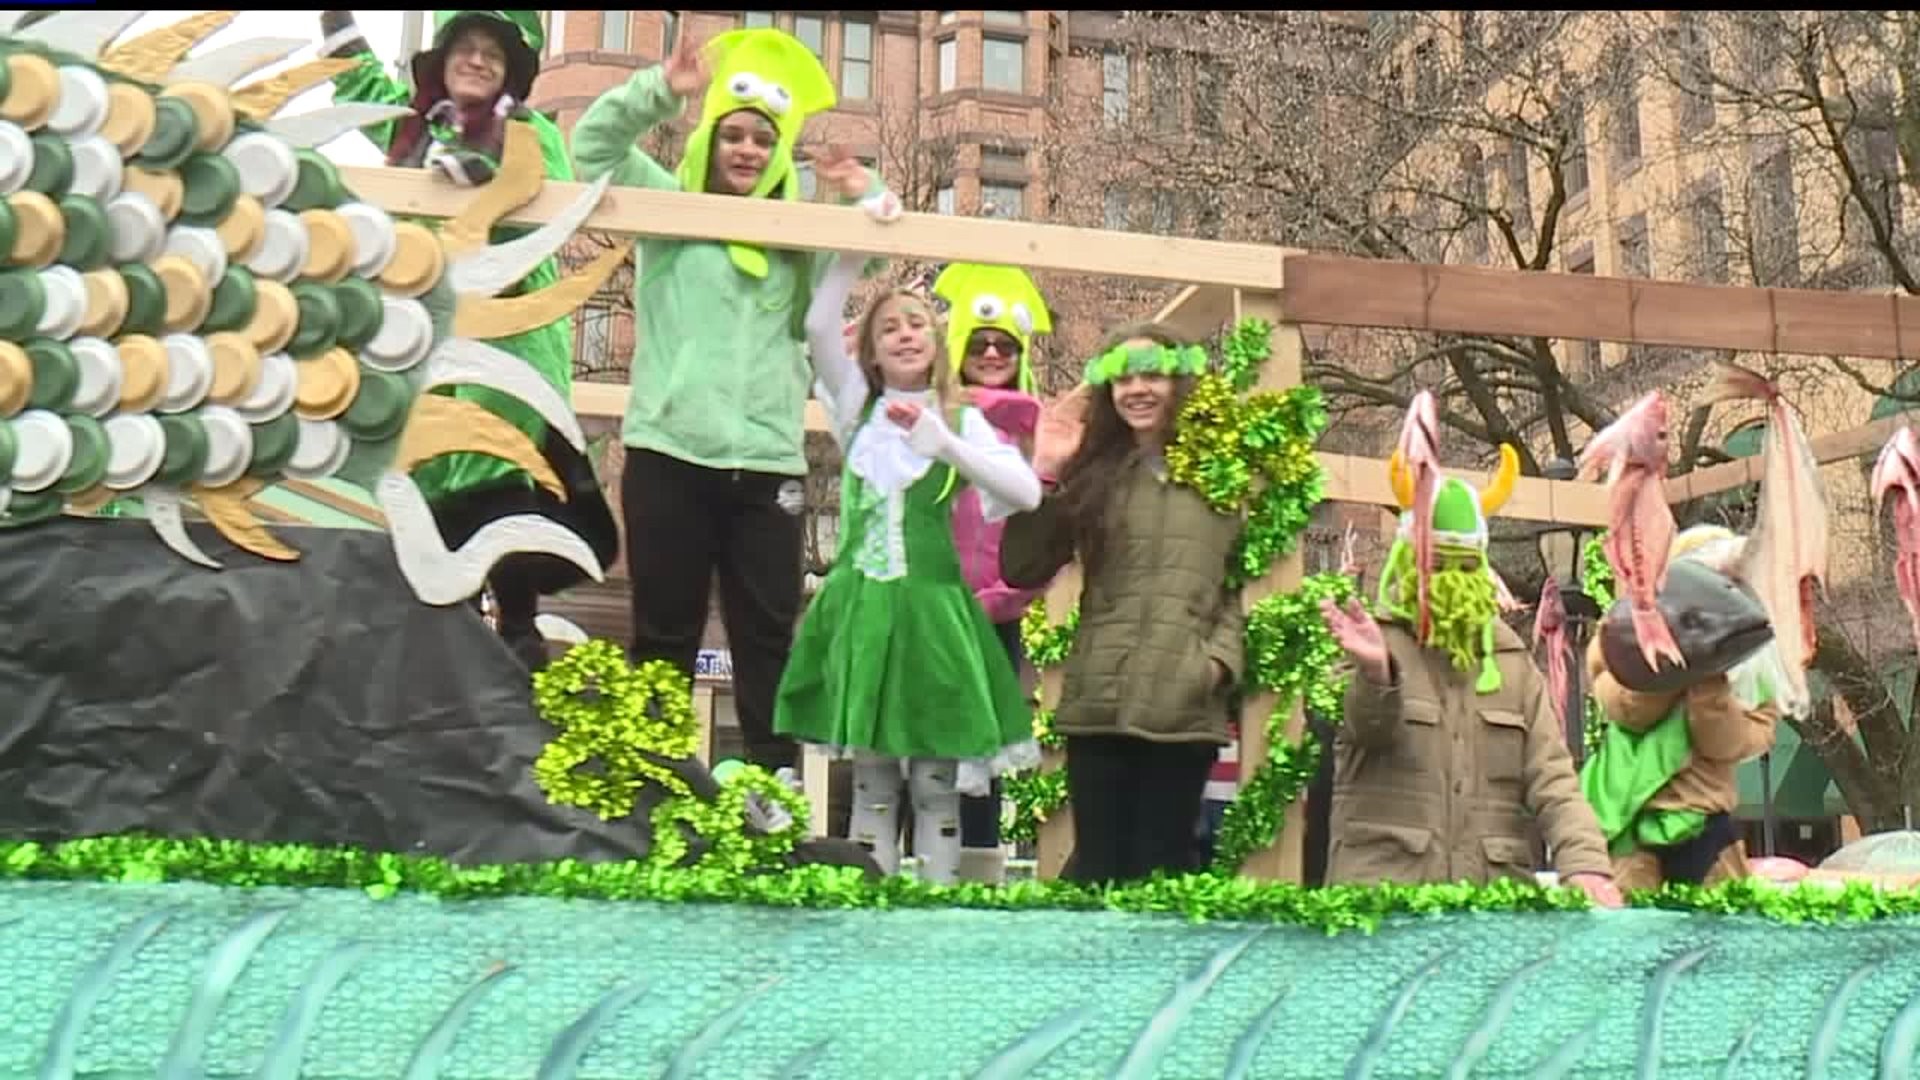 York celebrates St Patricks day with 35th annual parade